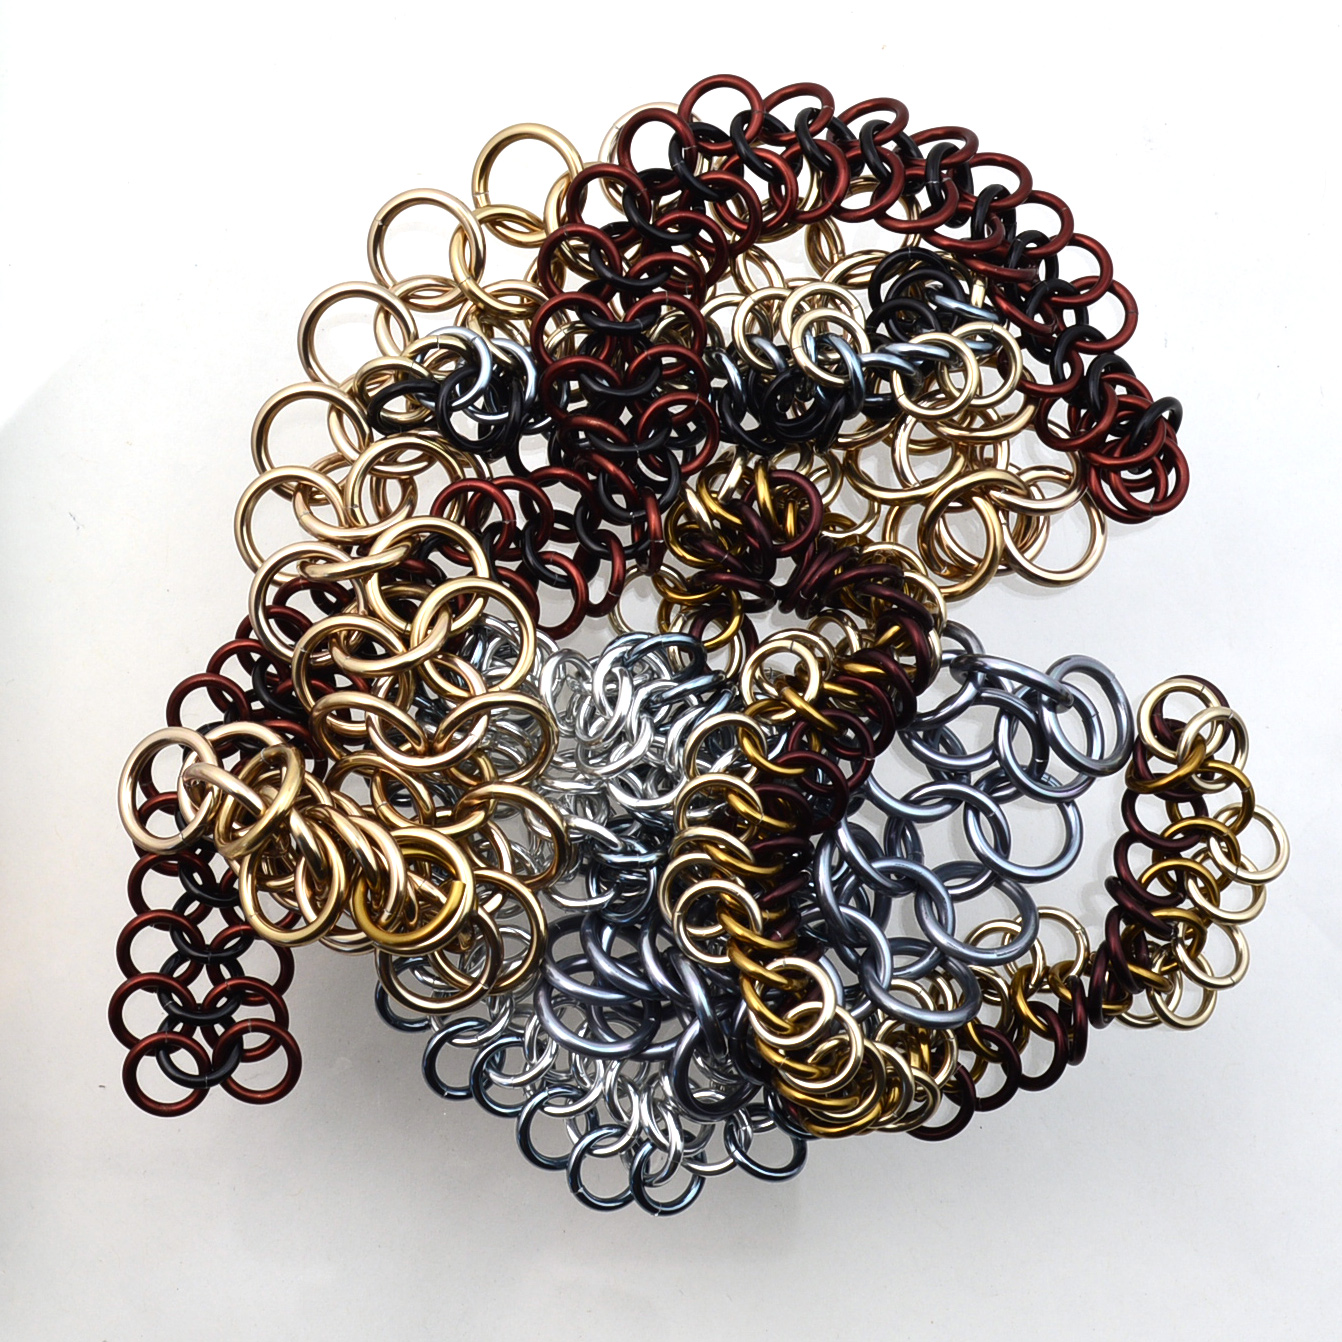 chainmaille mesh scraps in brown, grey and silver